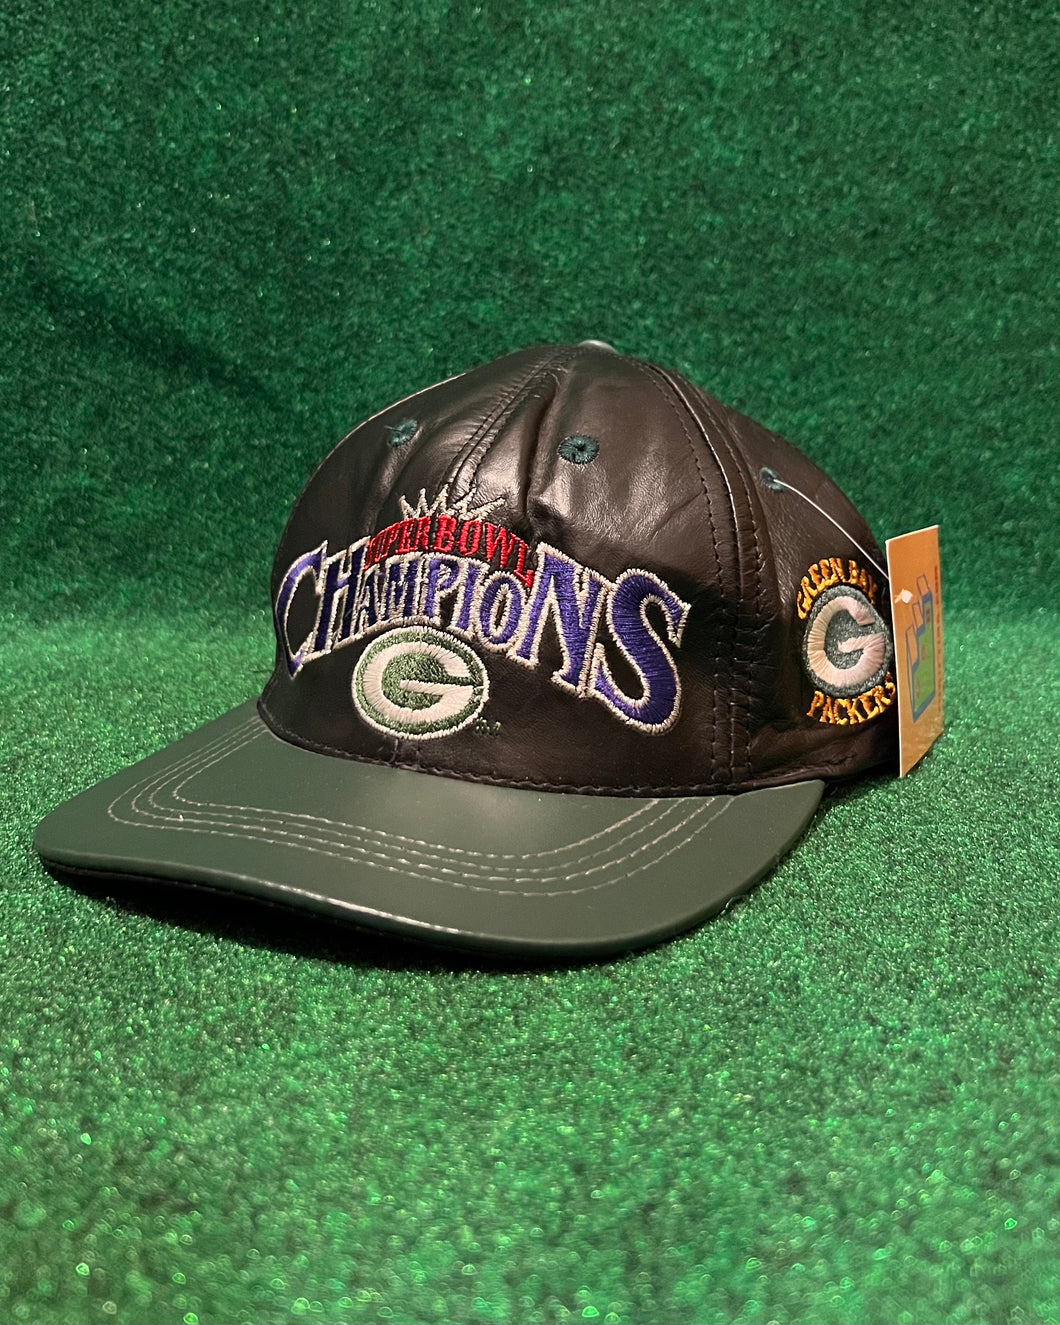 Vintage 1997 Green Bay Packers Super Bowl Champions Leather Hat